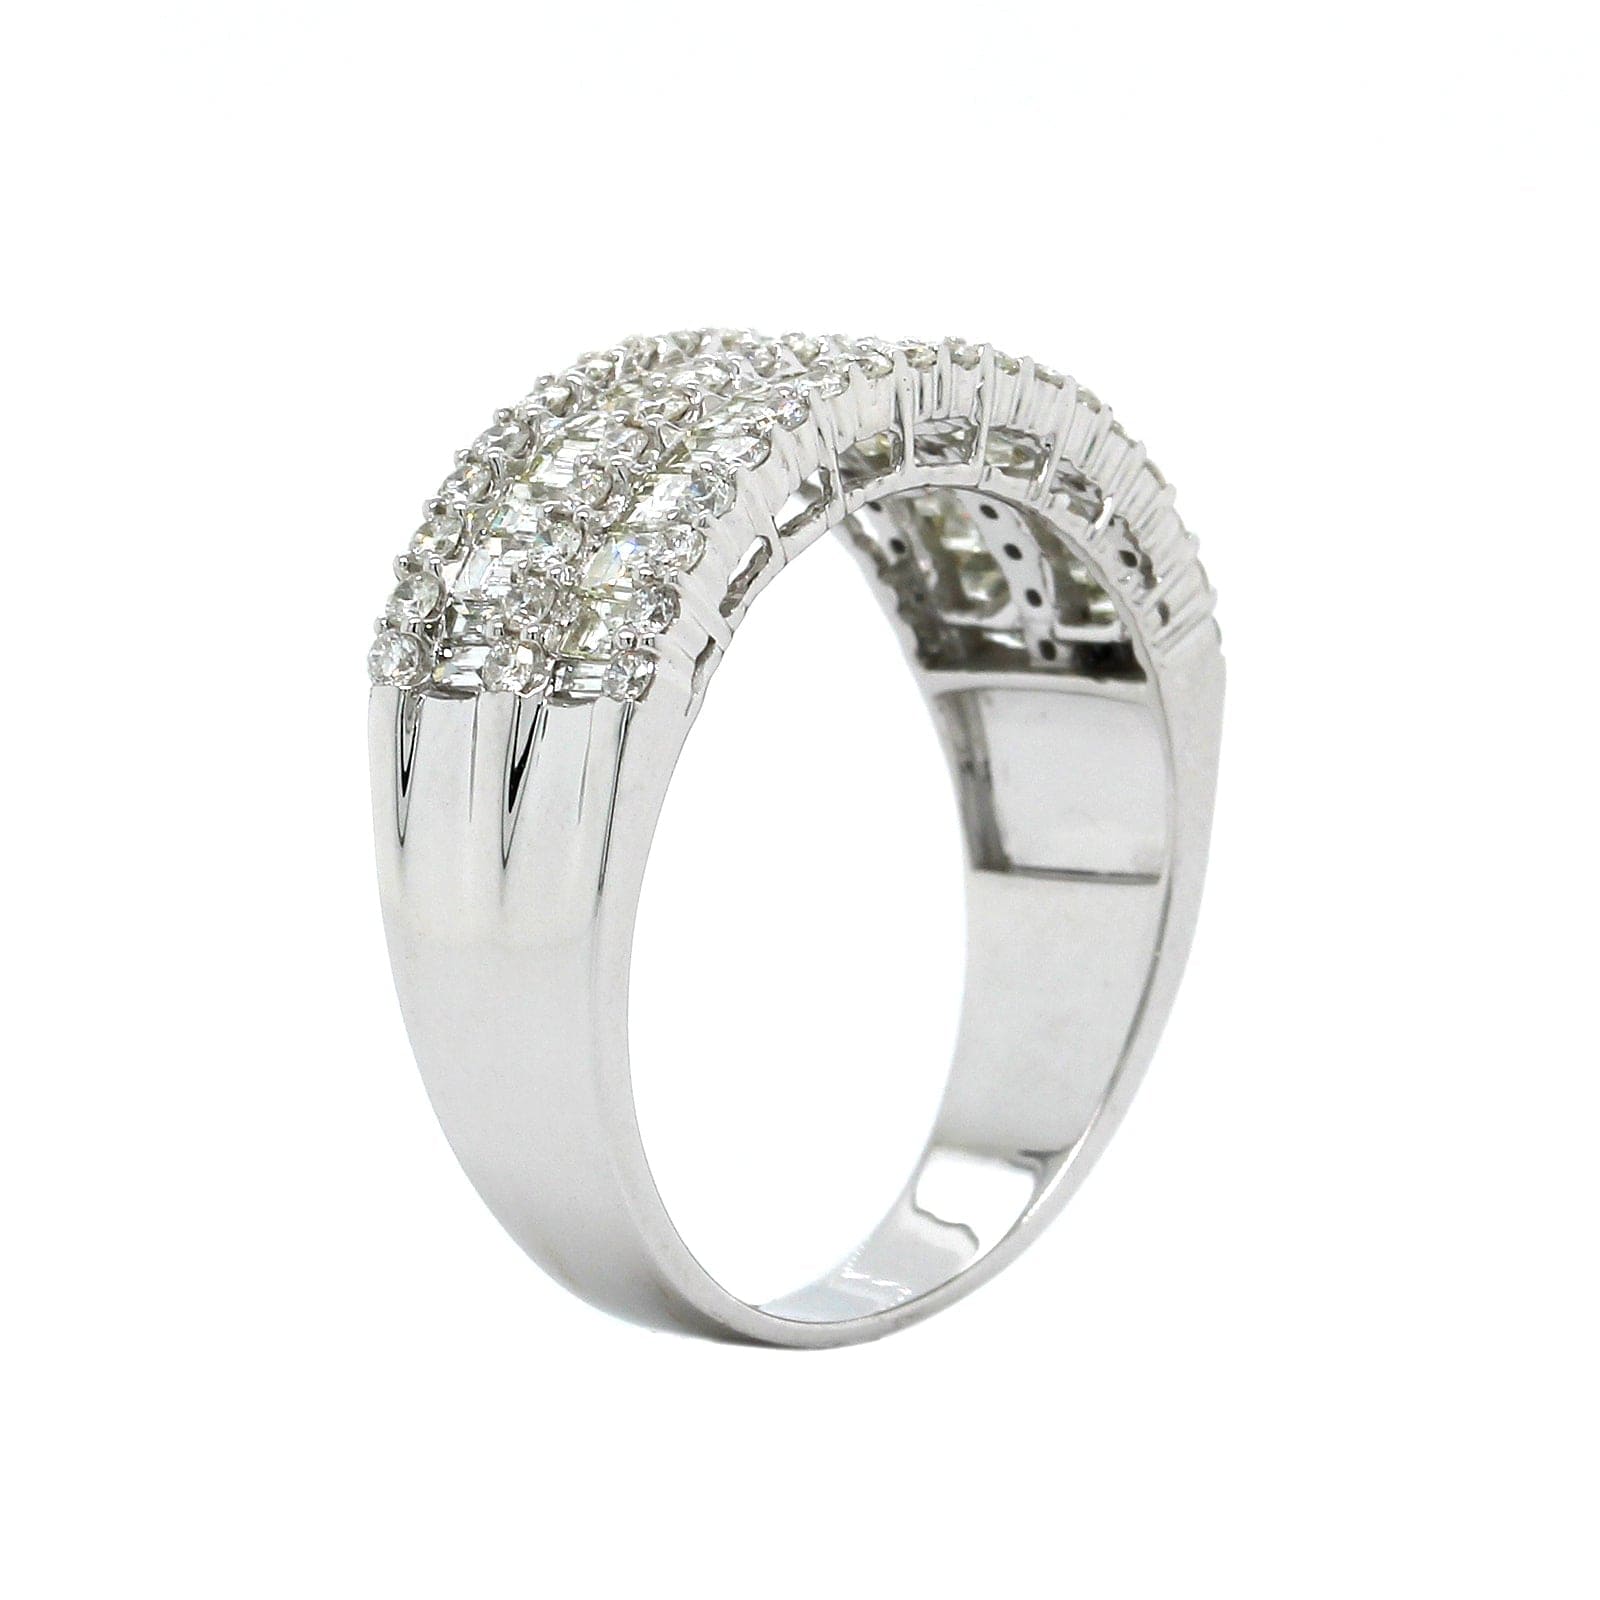 14k white gold round and baguette diamond barset ring, Genovese Jewelers